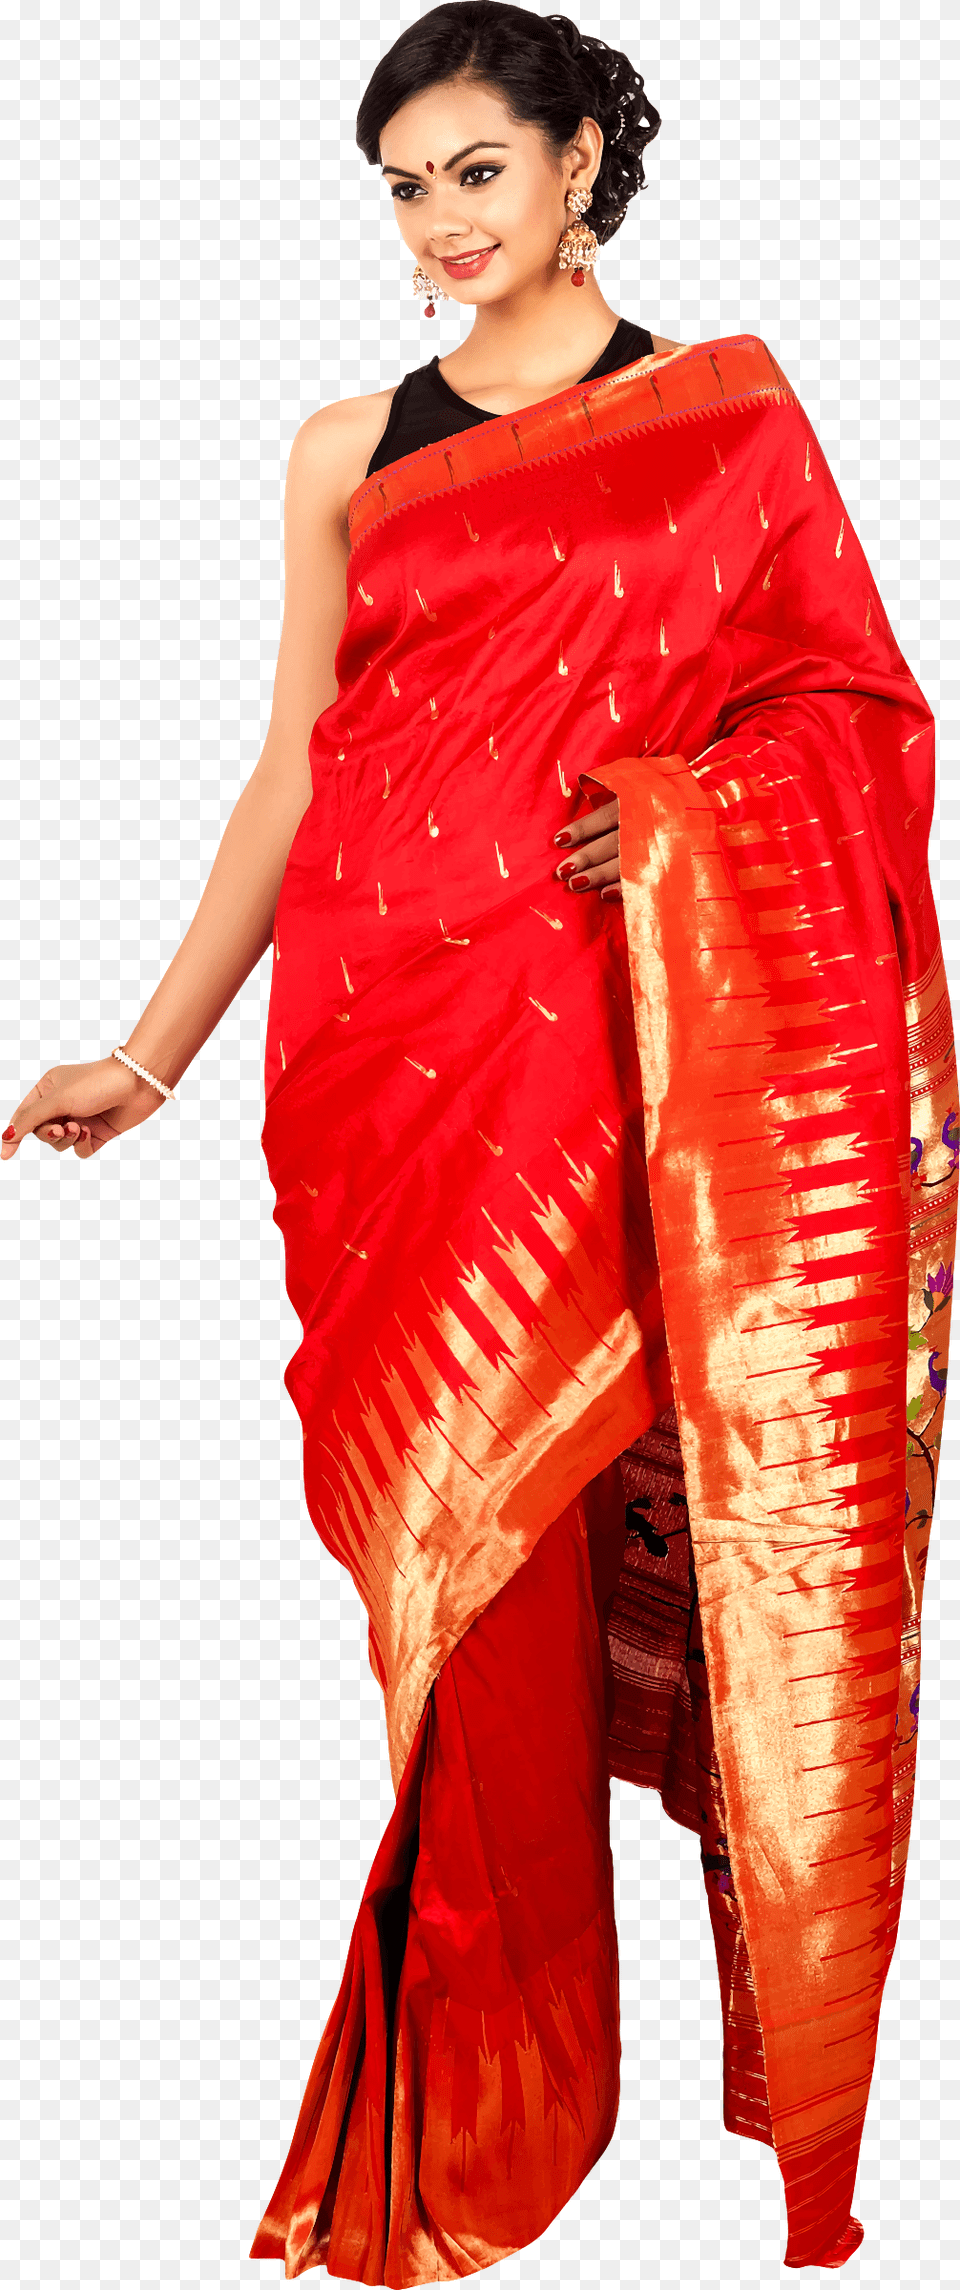 This Icons Design Of Woman In Saree, Adult, Female, Person, Silk Png Image